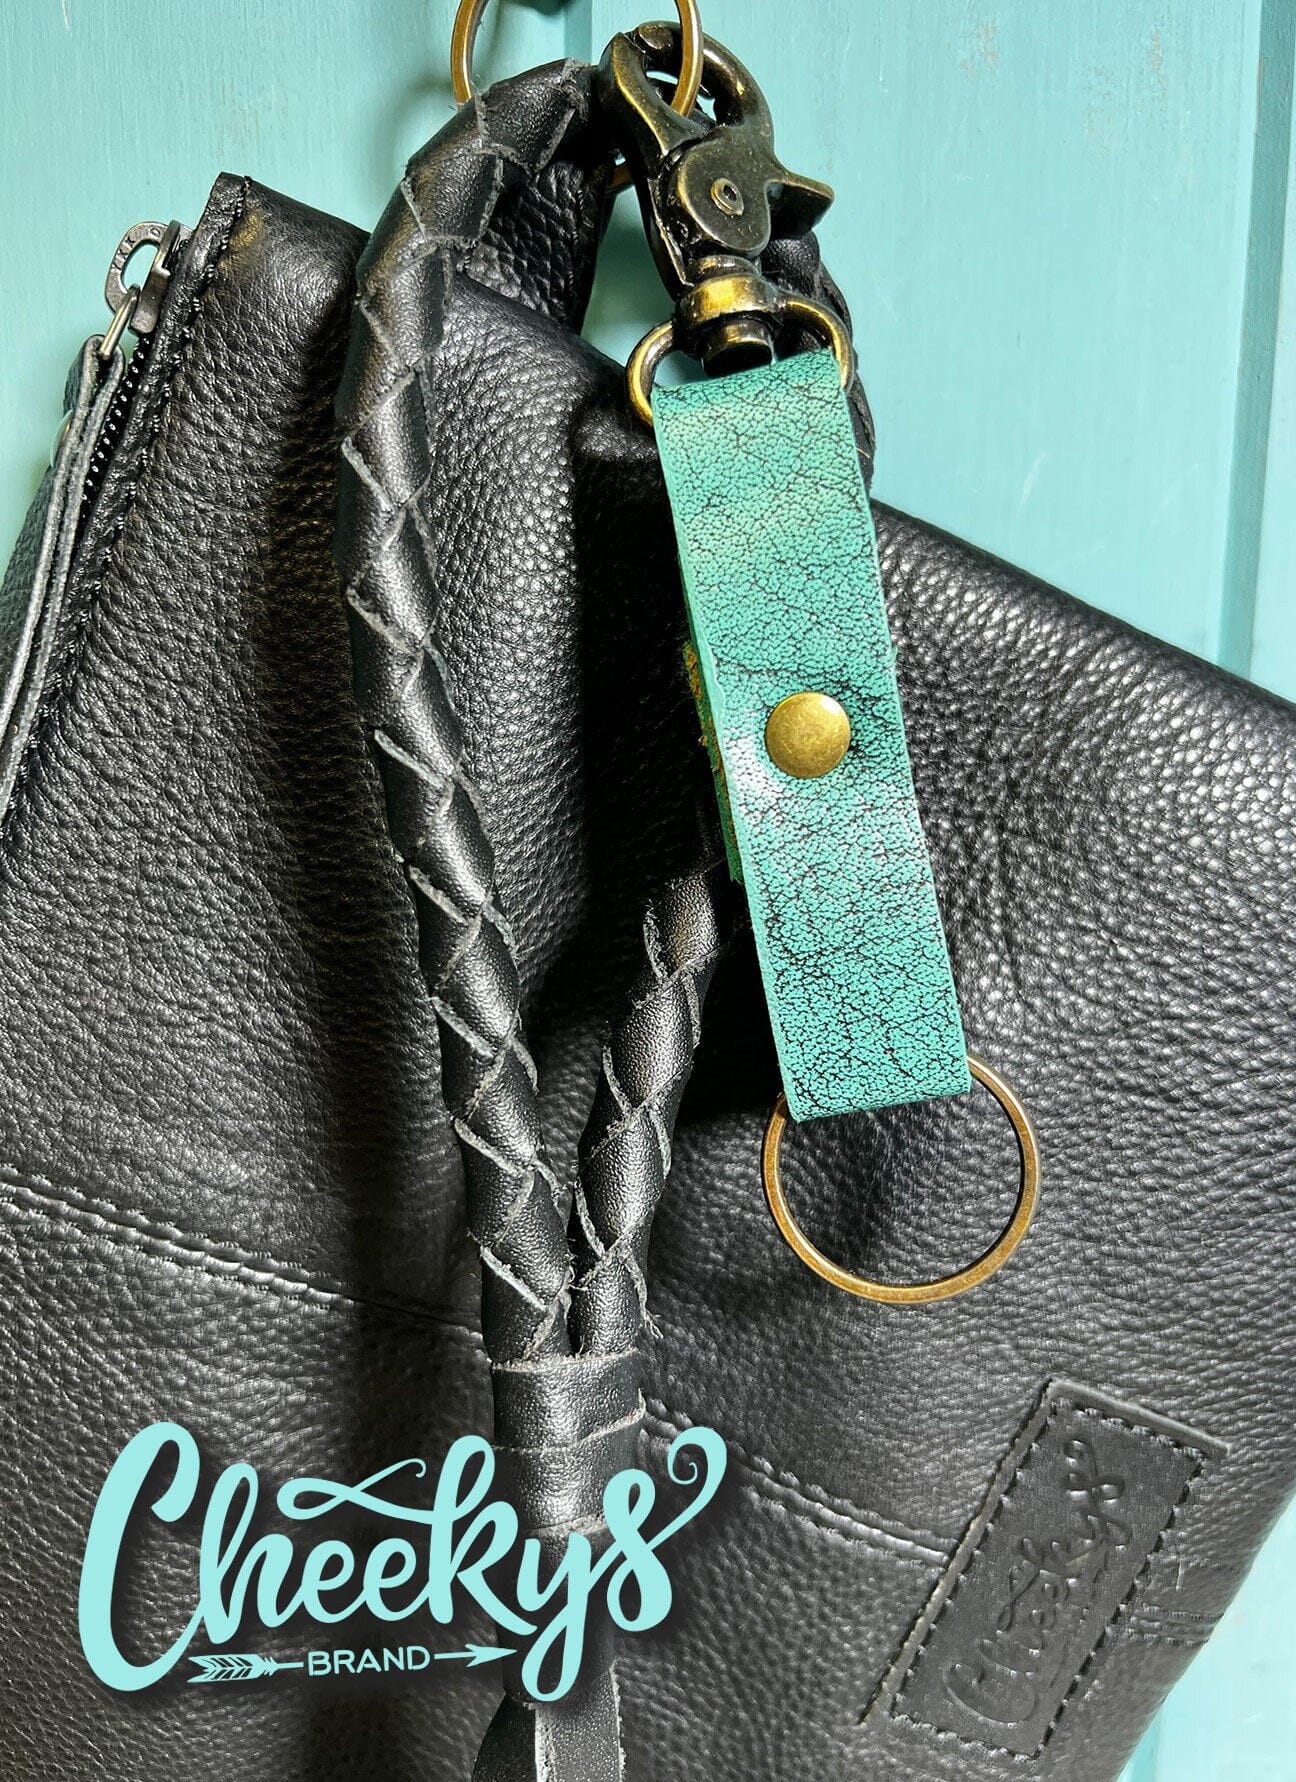 Leather Keychain Cheekys Brand Turquoise Leather 